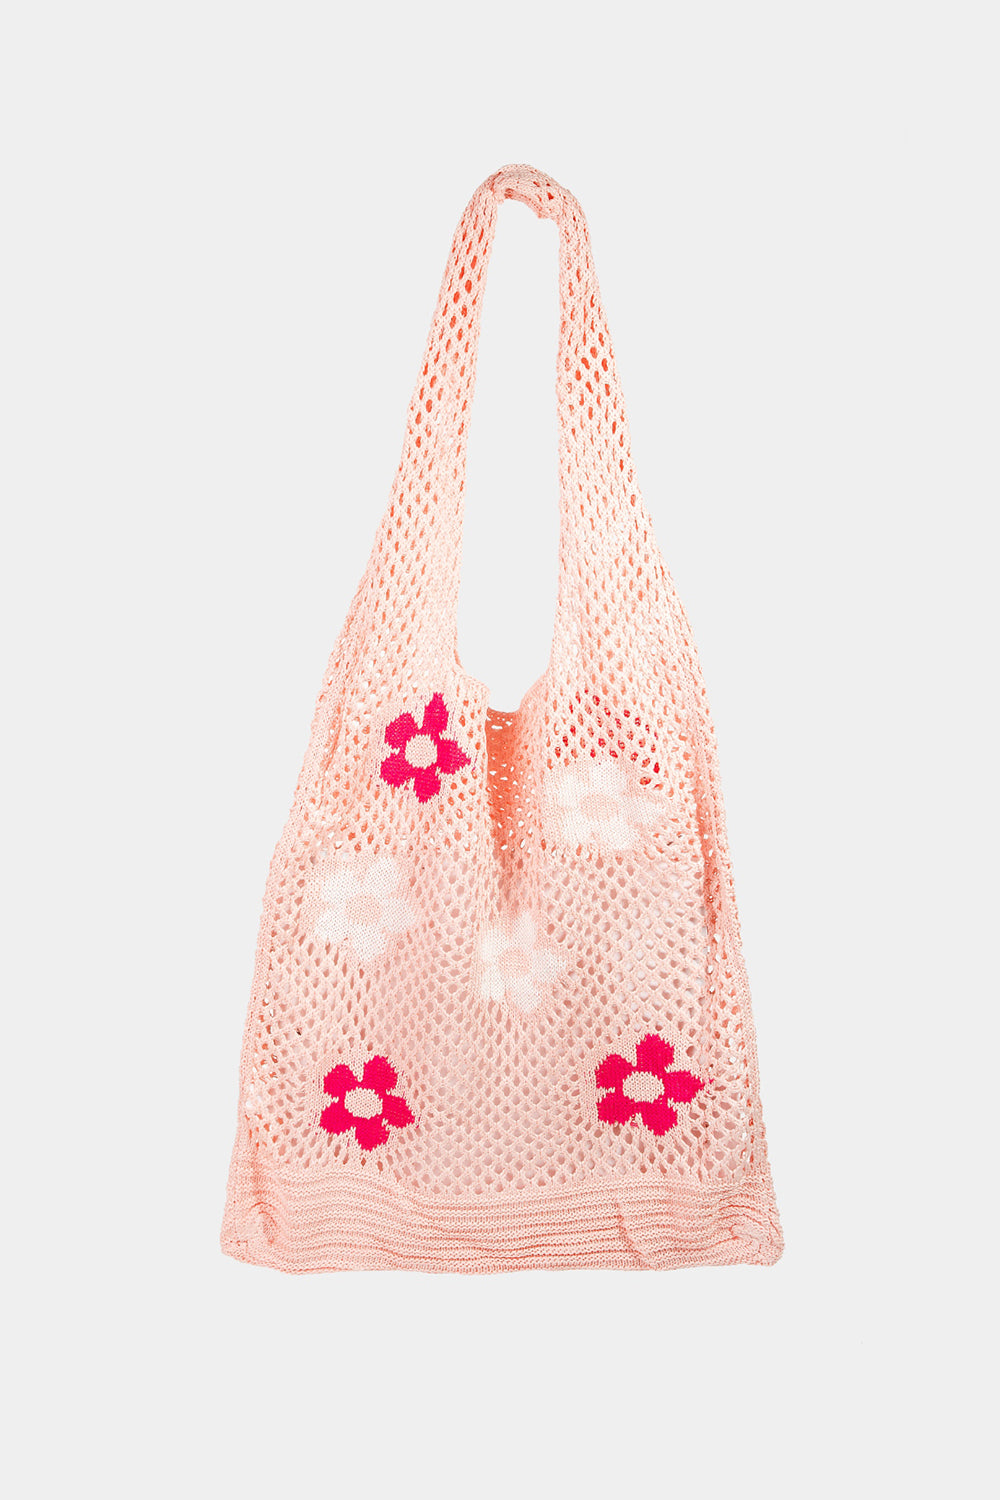 Fame Flower Pattern Knitted Tote Bag in Two Colors Southern Soul Collectives